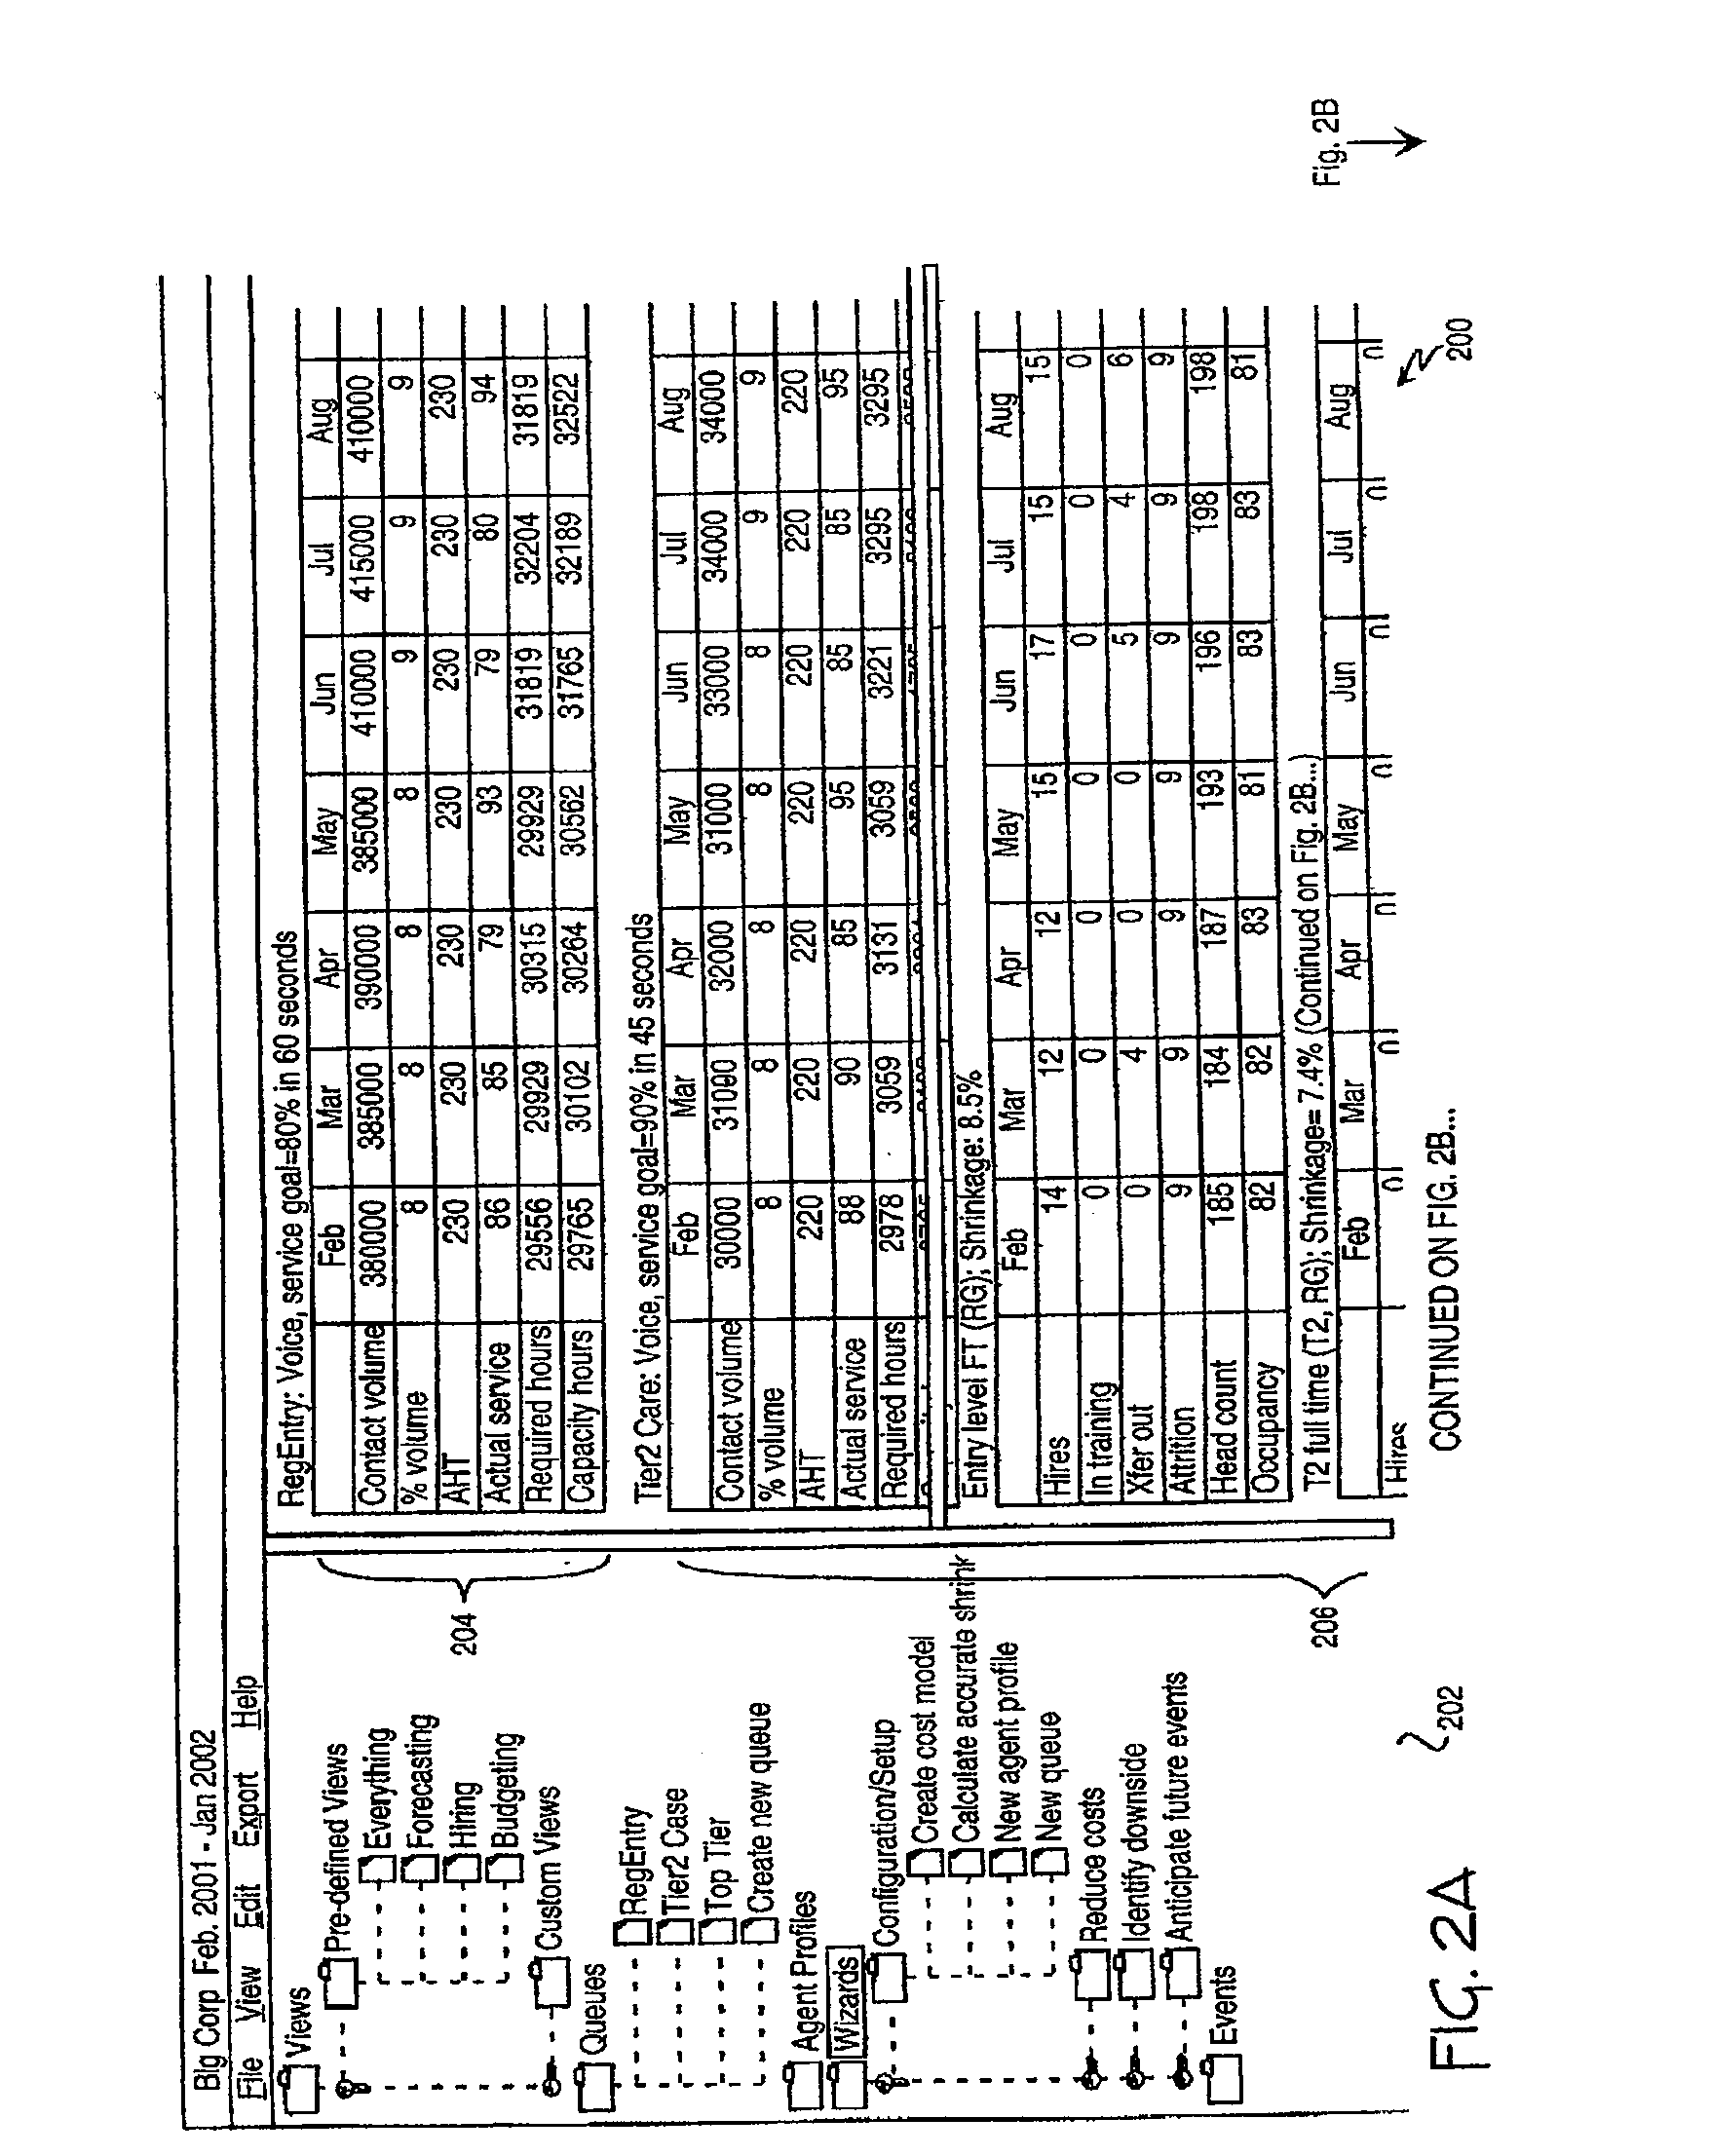 Systems and methods for performing long-term simulation